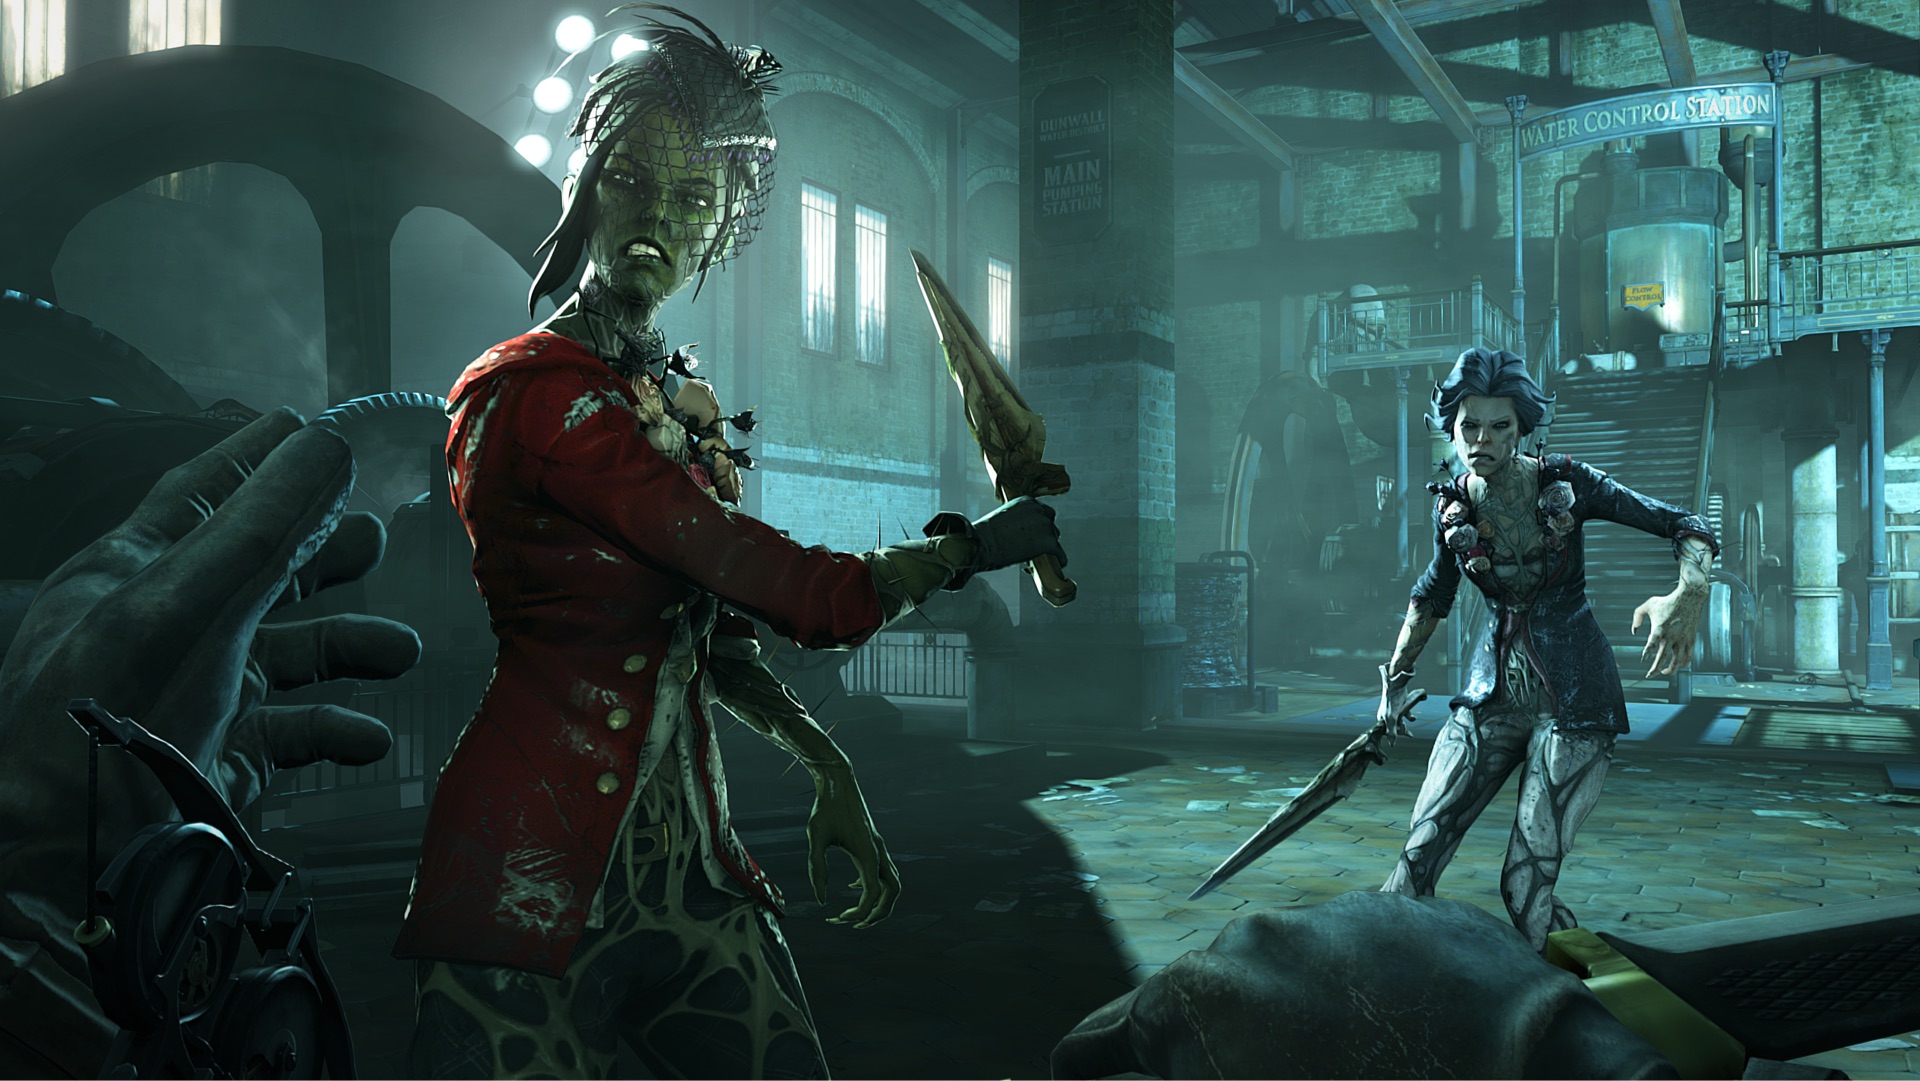 Dishonored Gameplay Parte 2 - O Esgoto (Dunwall Sewers) e o Cofre